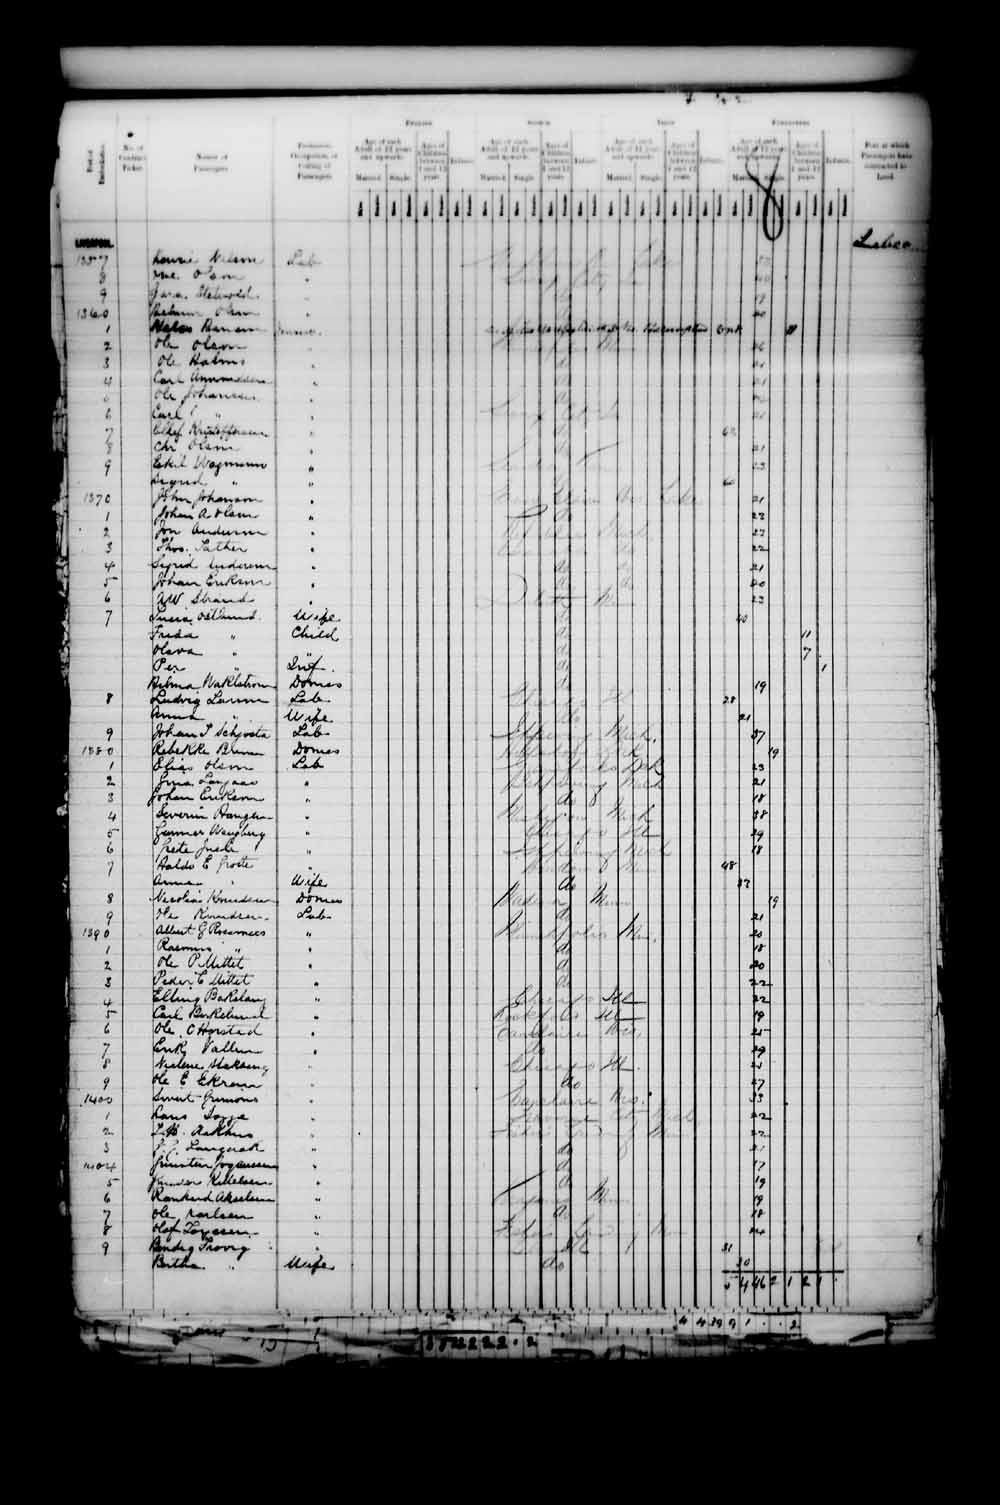 Digitized page of Passenger Lists for Image No.: e003546735